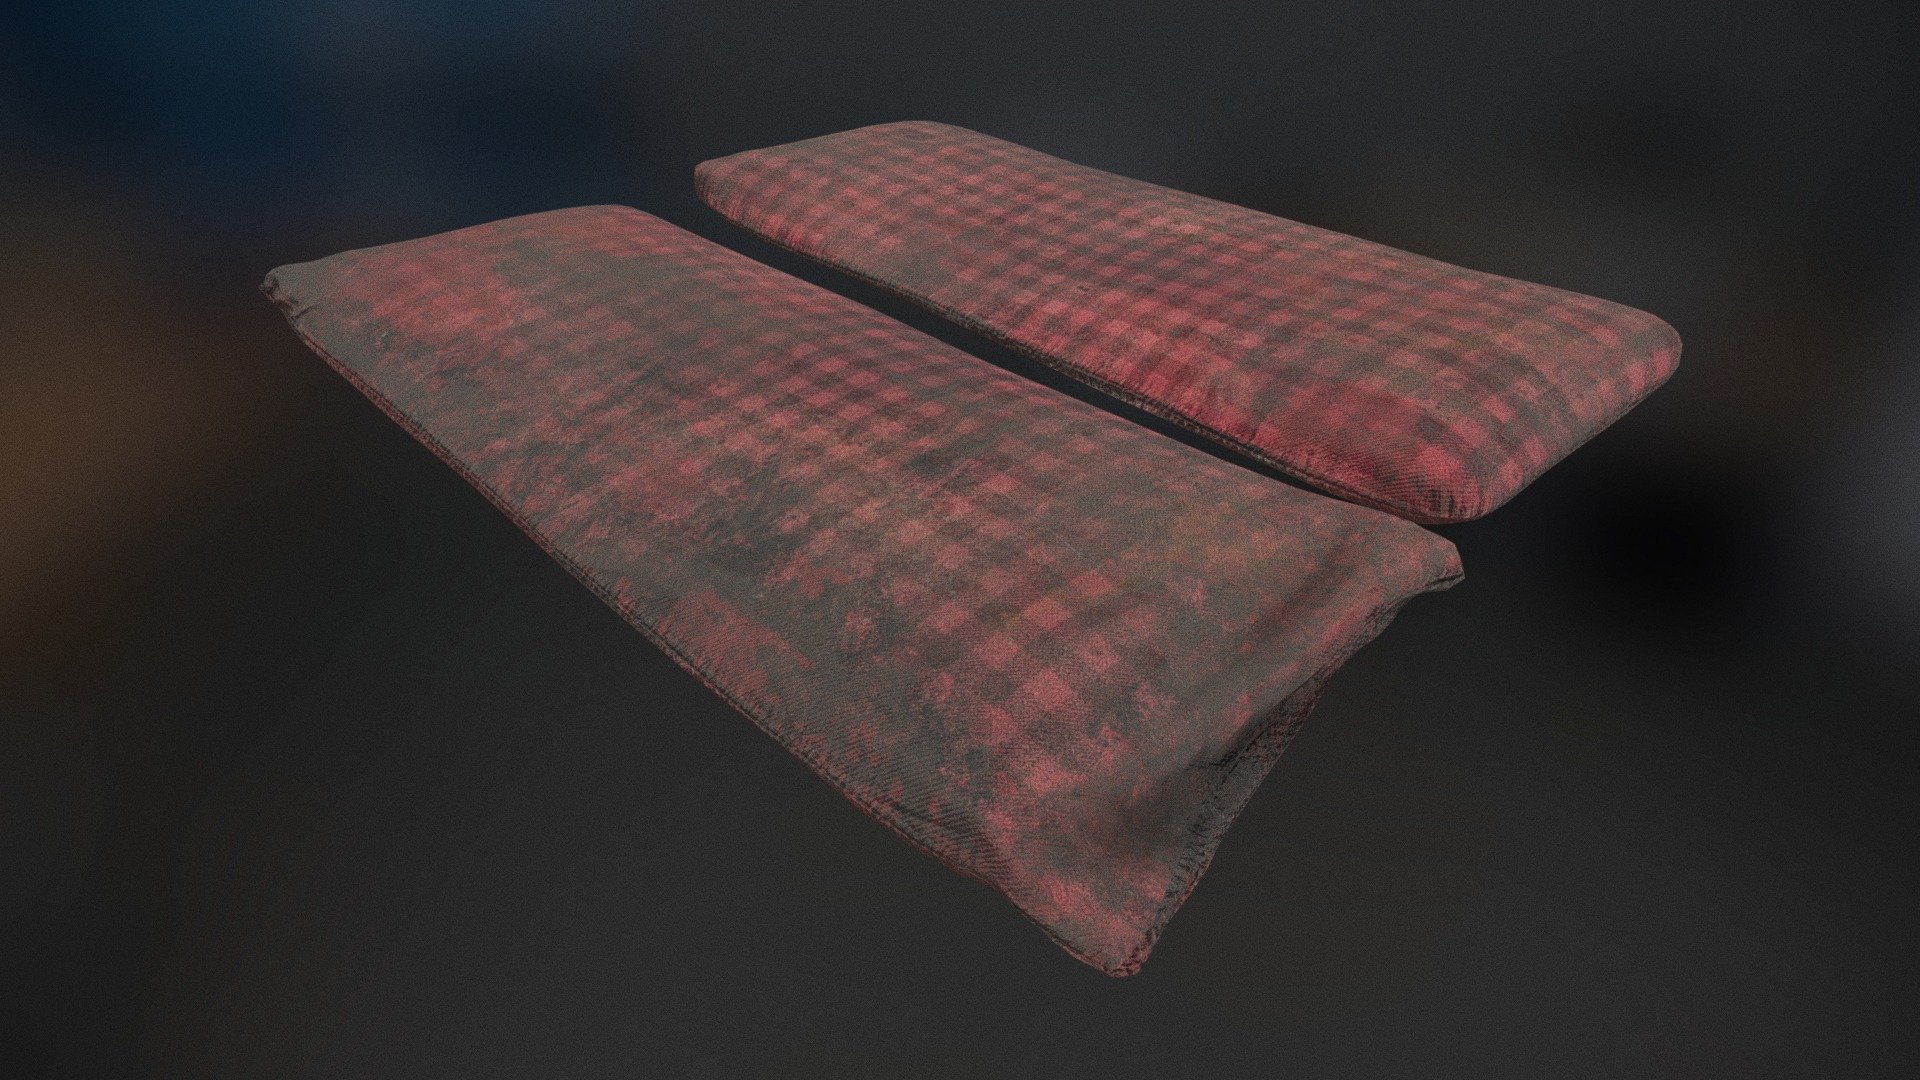 Created using Marvelous Designer, cleaned up in Blender and ZBrush, textured in Substance Painter.

Both use the same texture.

I know mattresses don't usually have the flannel pattern/texture but it looked good so we are vibeing with it 3d model